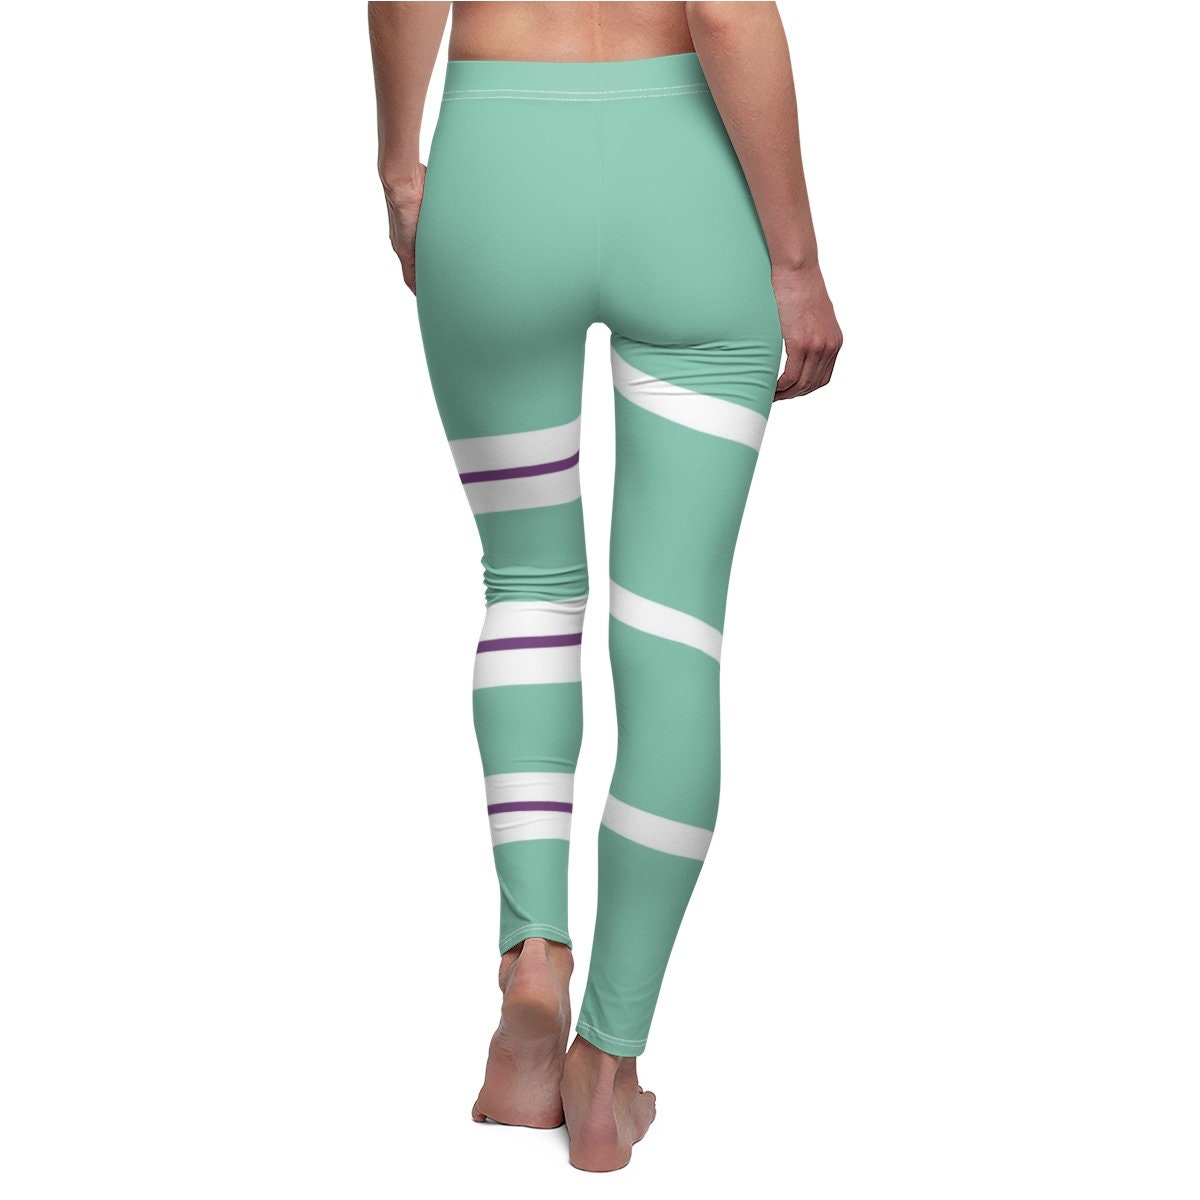 Wreck-It Ralph Costume Vanellope Leggings sold by Adriana